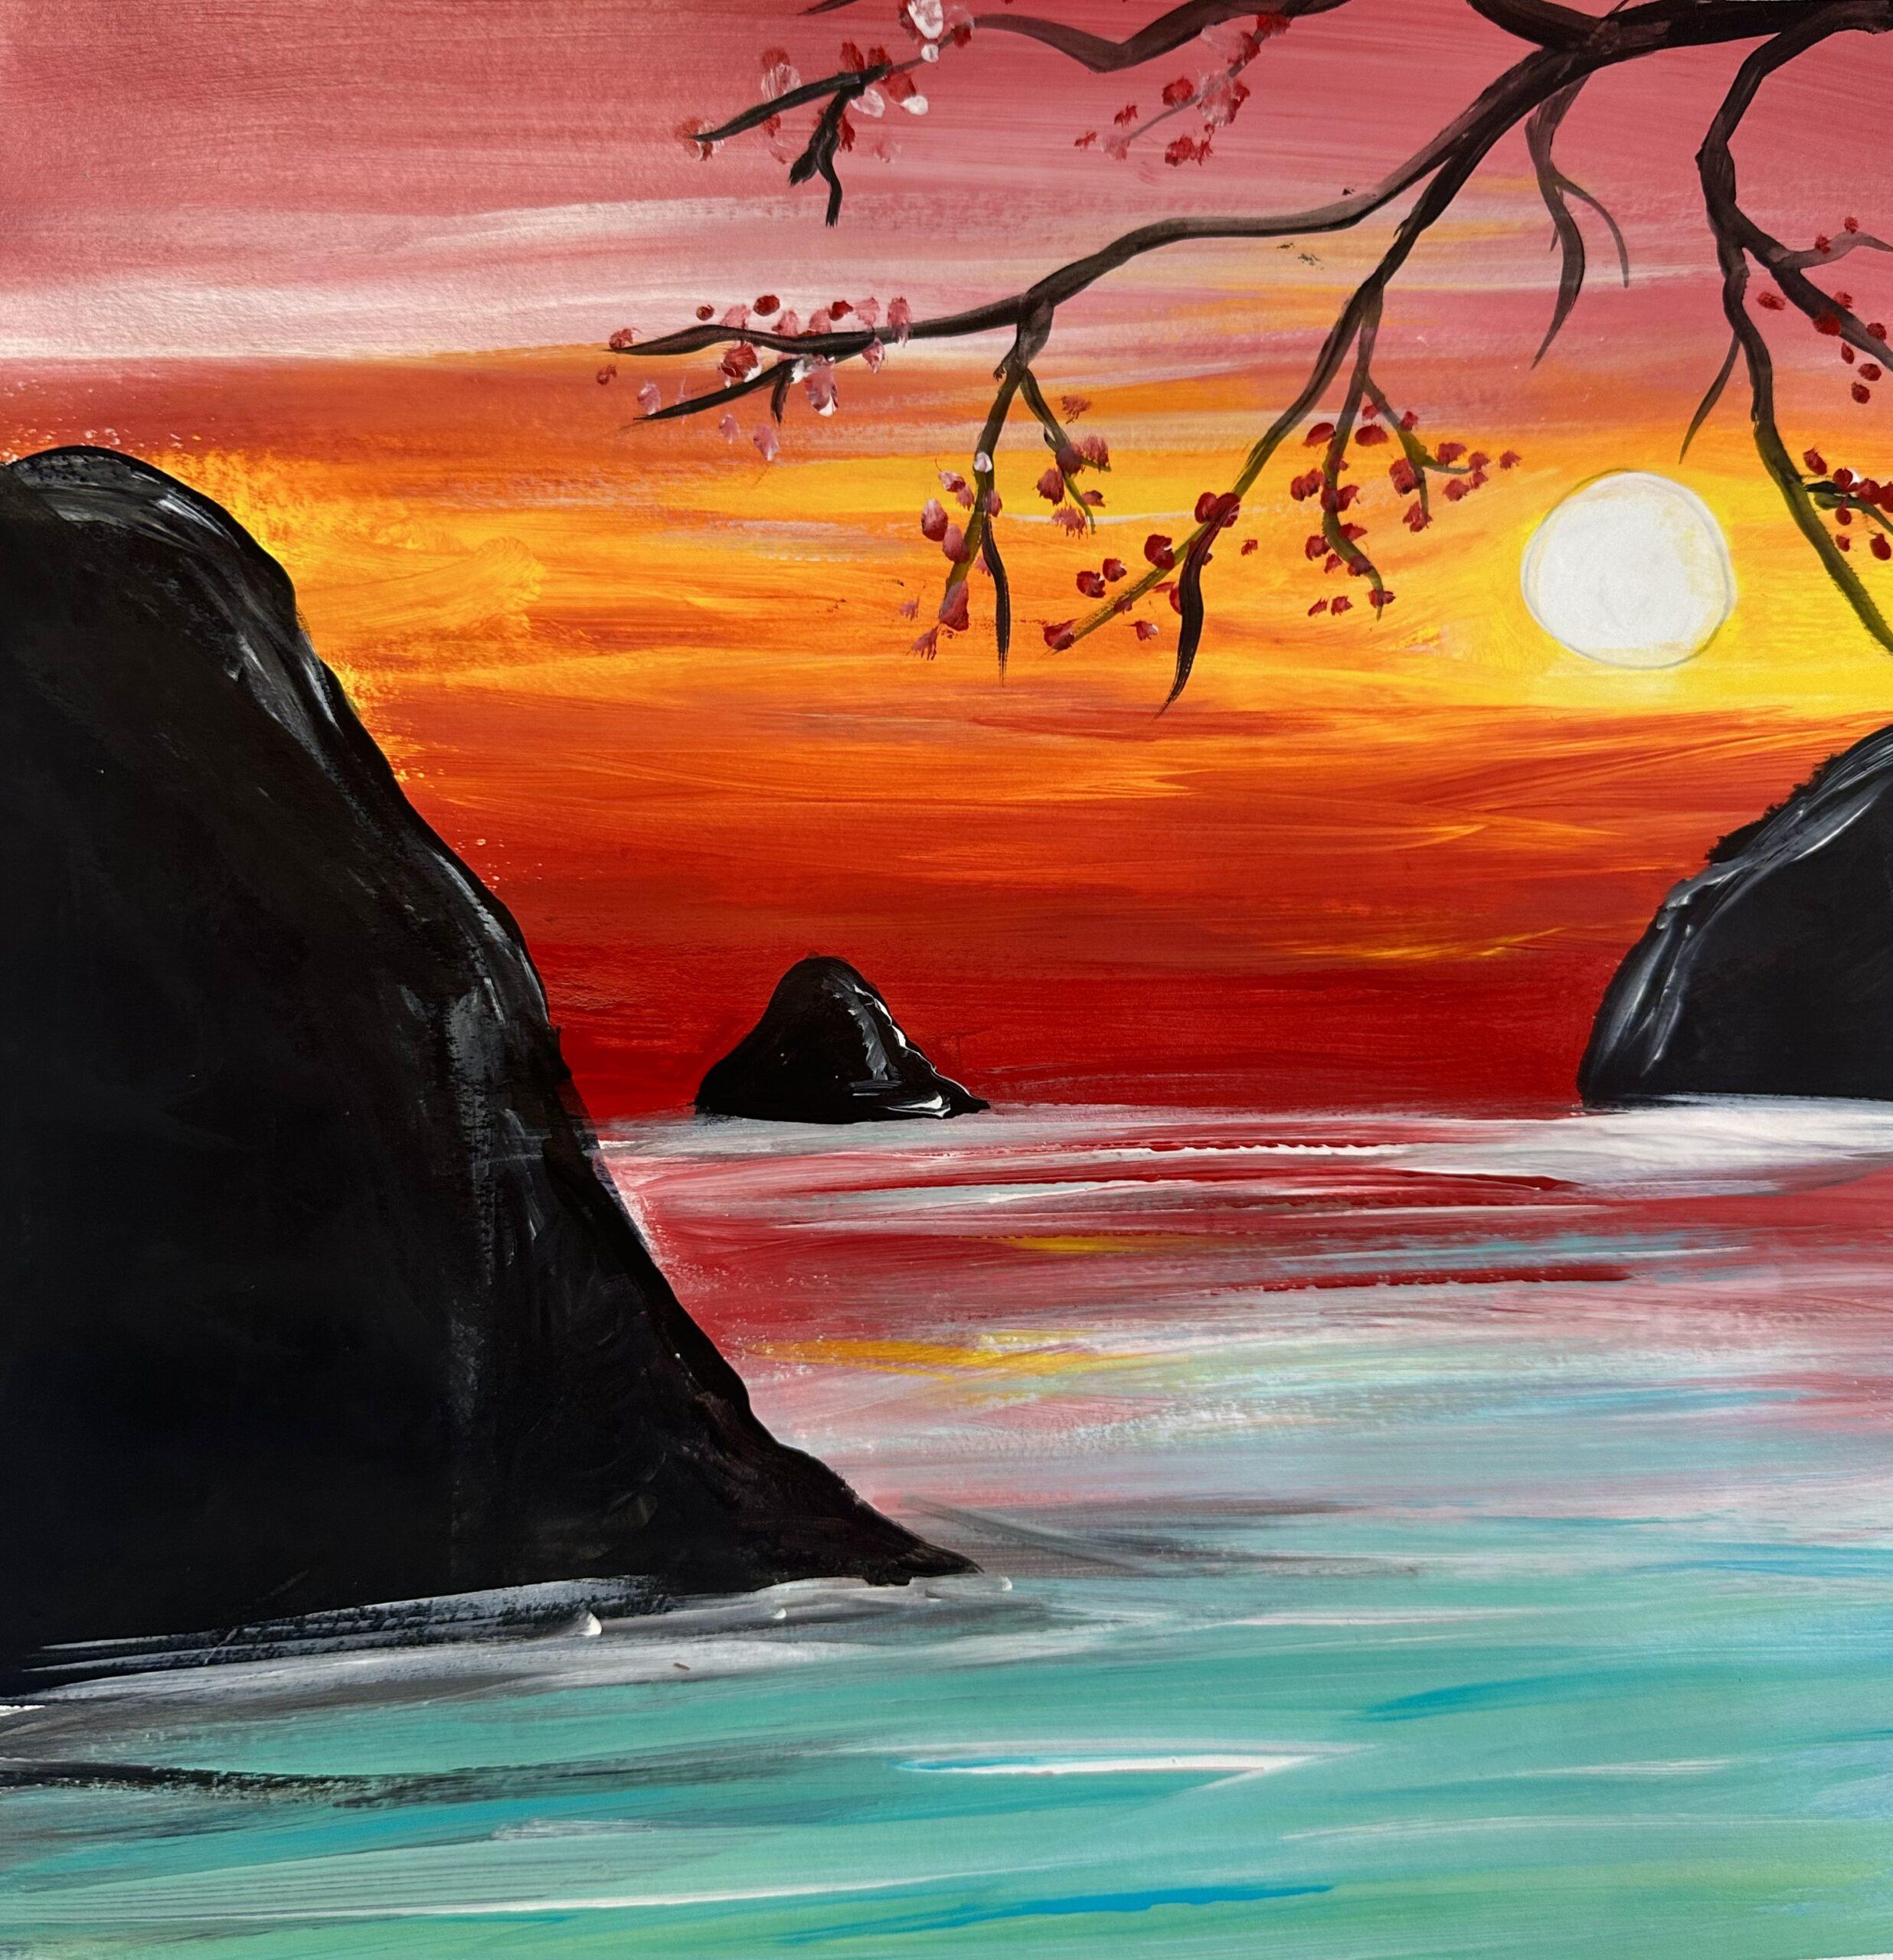 Image showing Ocean with setting sun and mountains. This Art work was done by the students in our Creating My Art center.